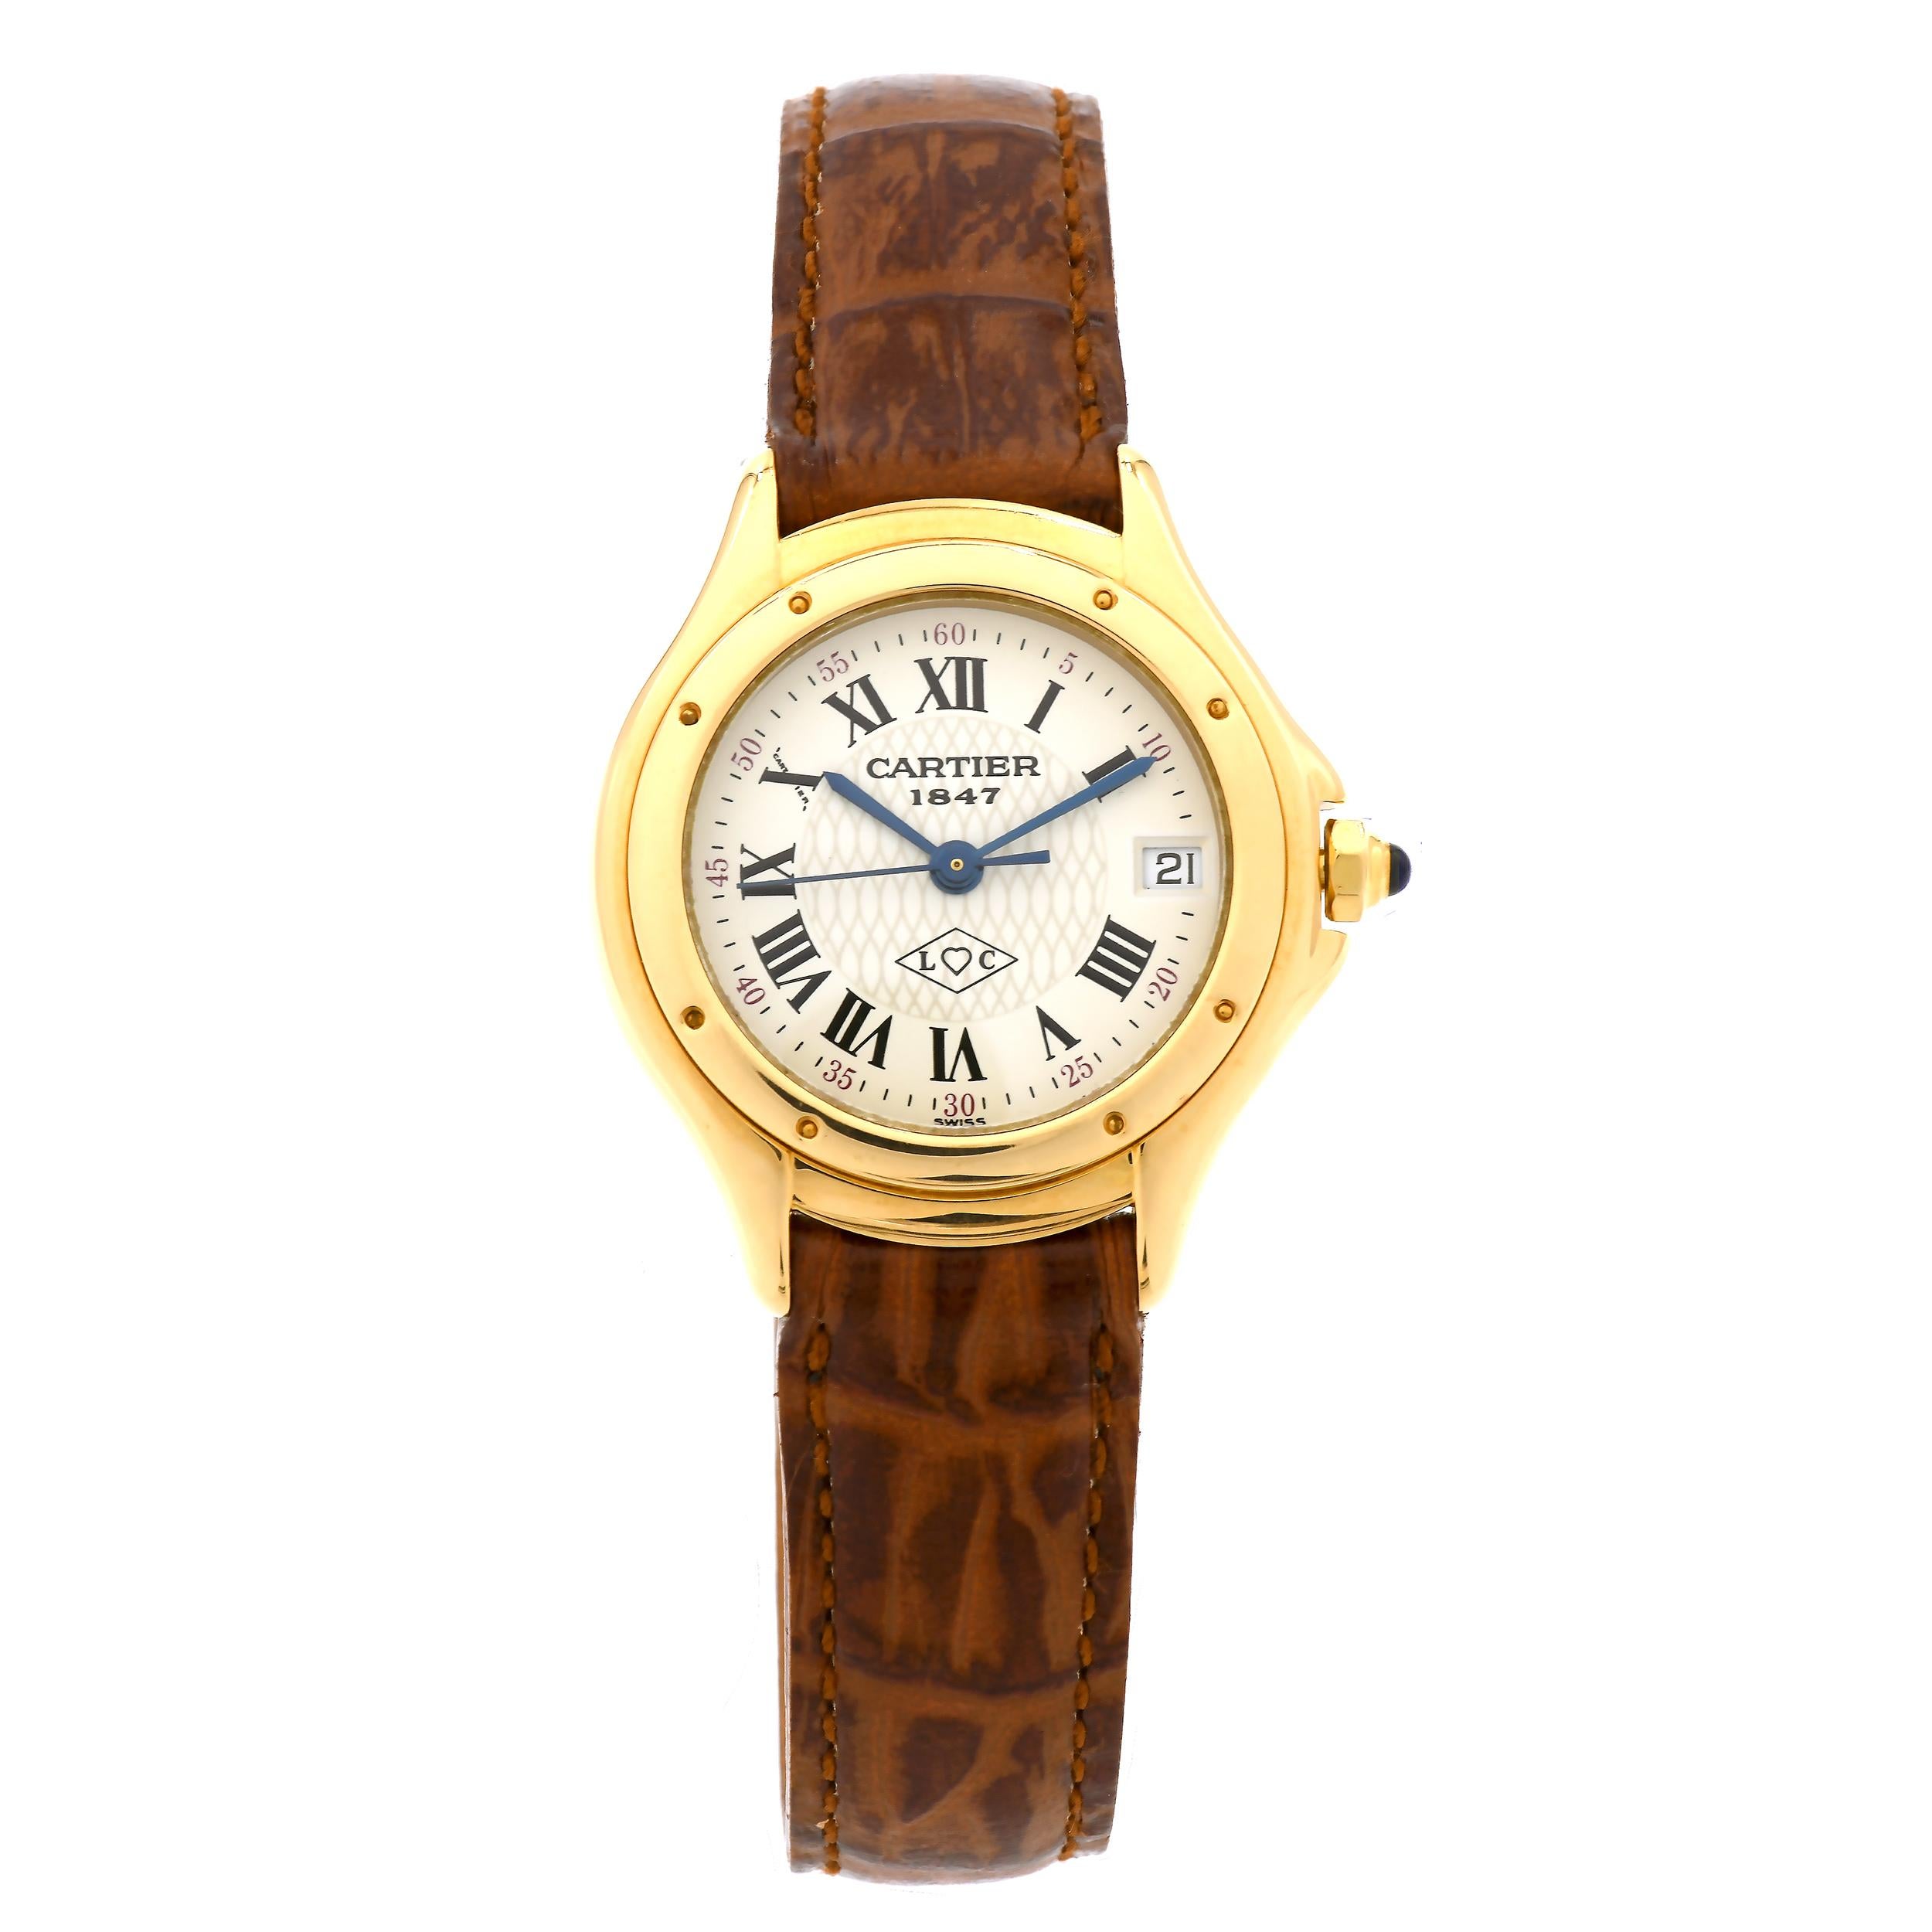  Cartier Cougar 18k yellow gold ladies Quartz date wristwatch with Cartier 18k gold buckle. Limited 150th anniversary edition with L heart C dial. ref 11711 

18k yellow gold 
30.0 grams 
Length: 30.8mm 
Width: 26.5mm 
Band width at case: 13mm 
Case